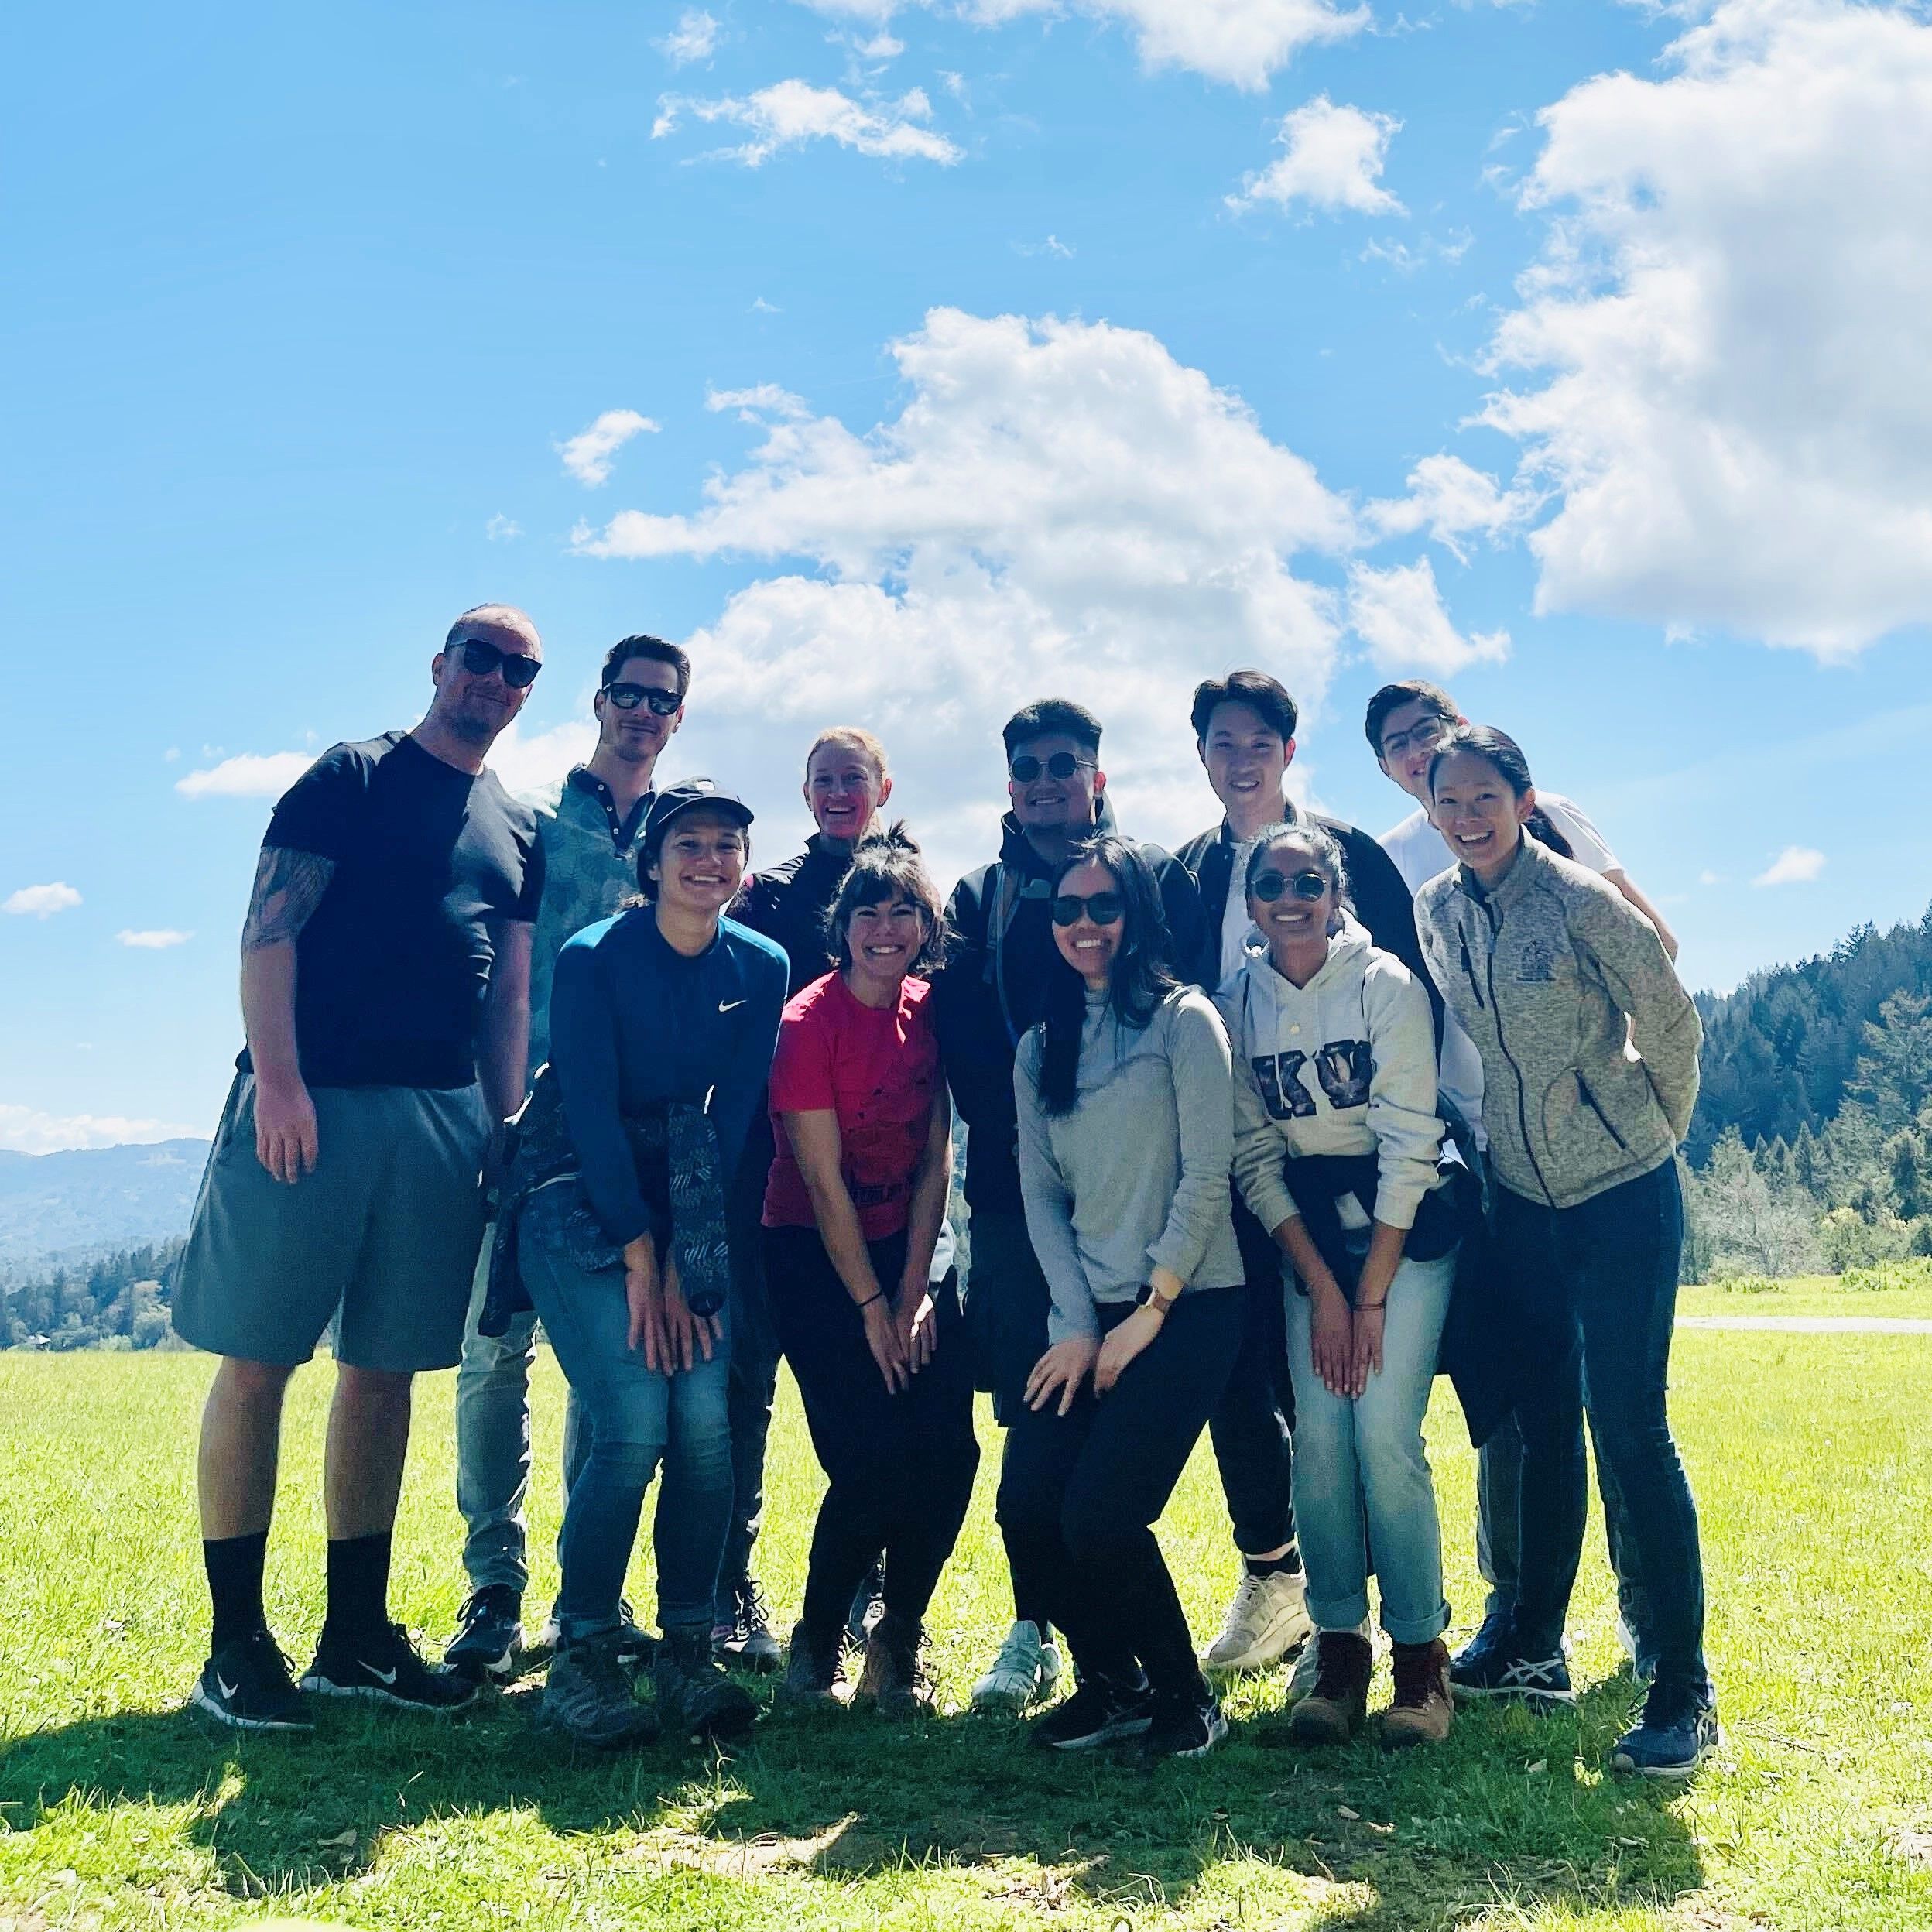 Lab members in a green field in the mountains on a nice day